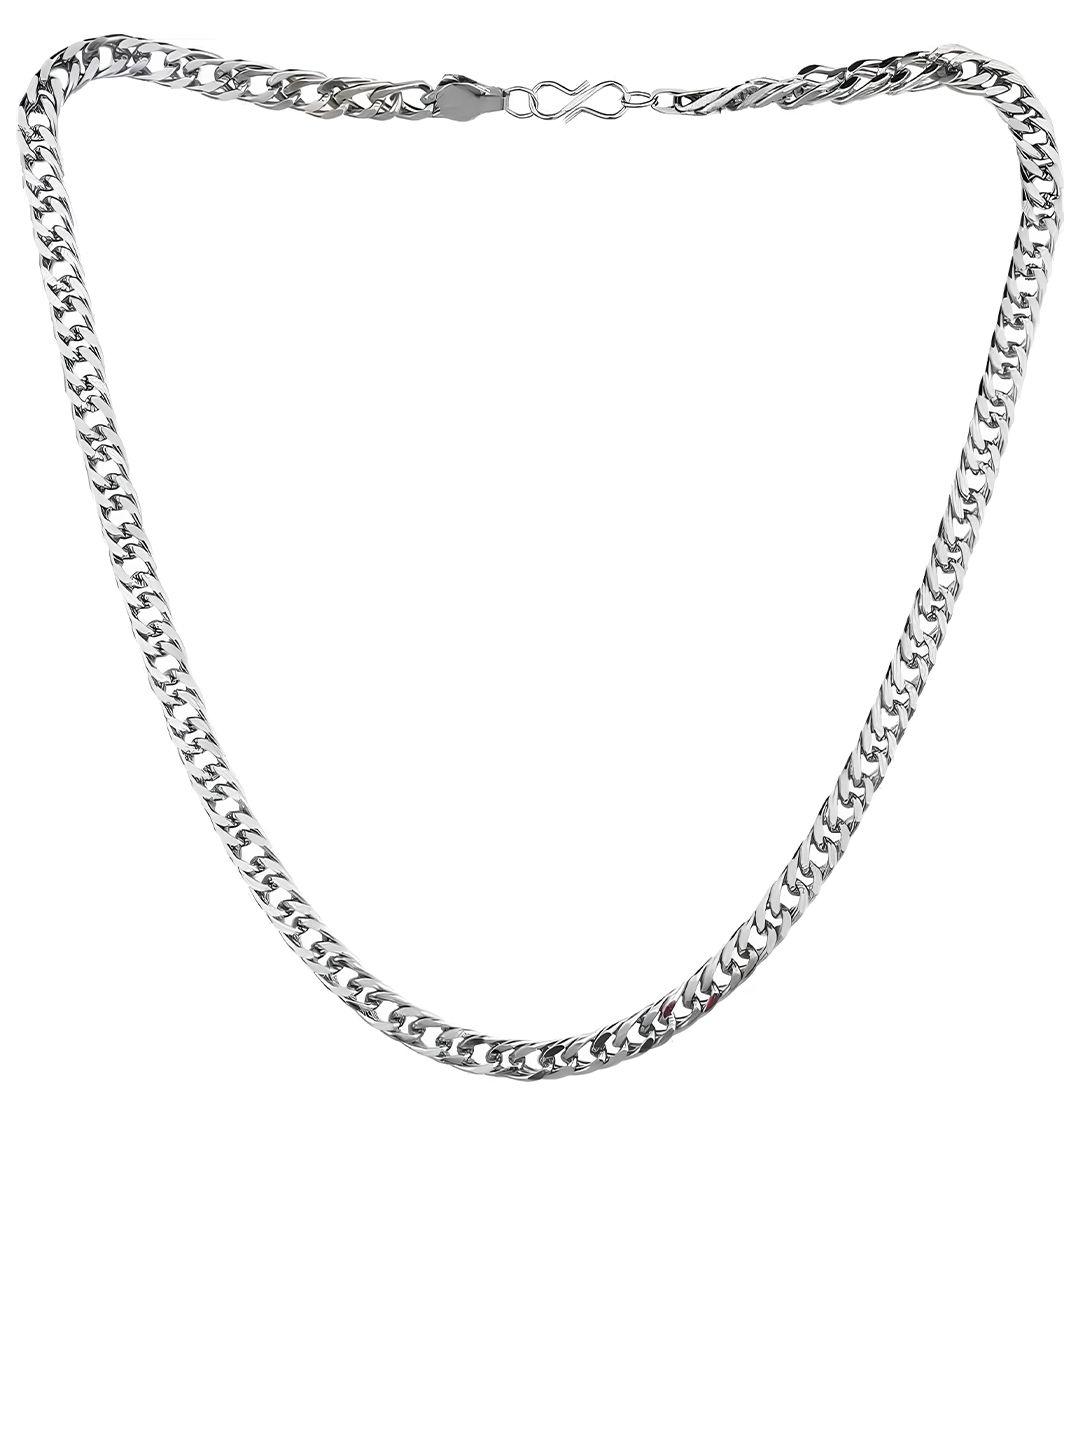 karishma kreations unisex stainless steel silver-plated chain